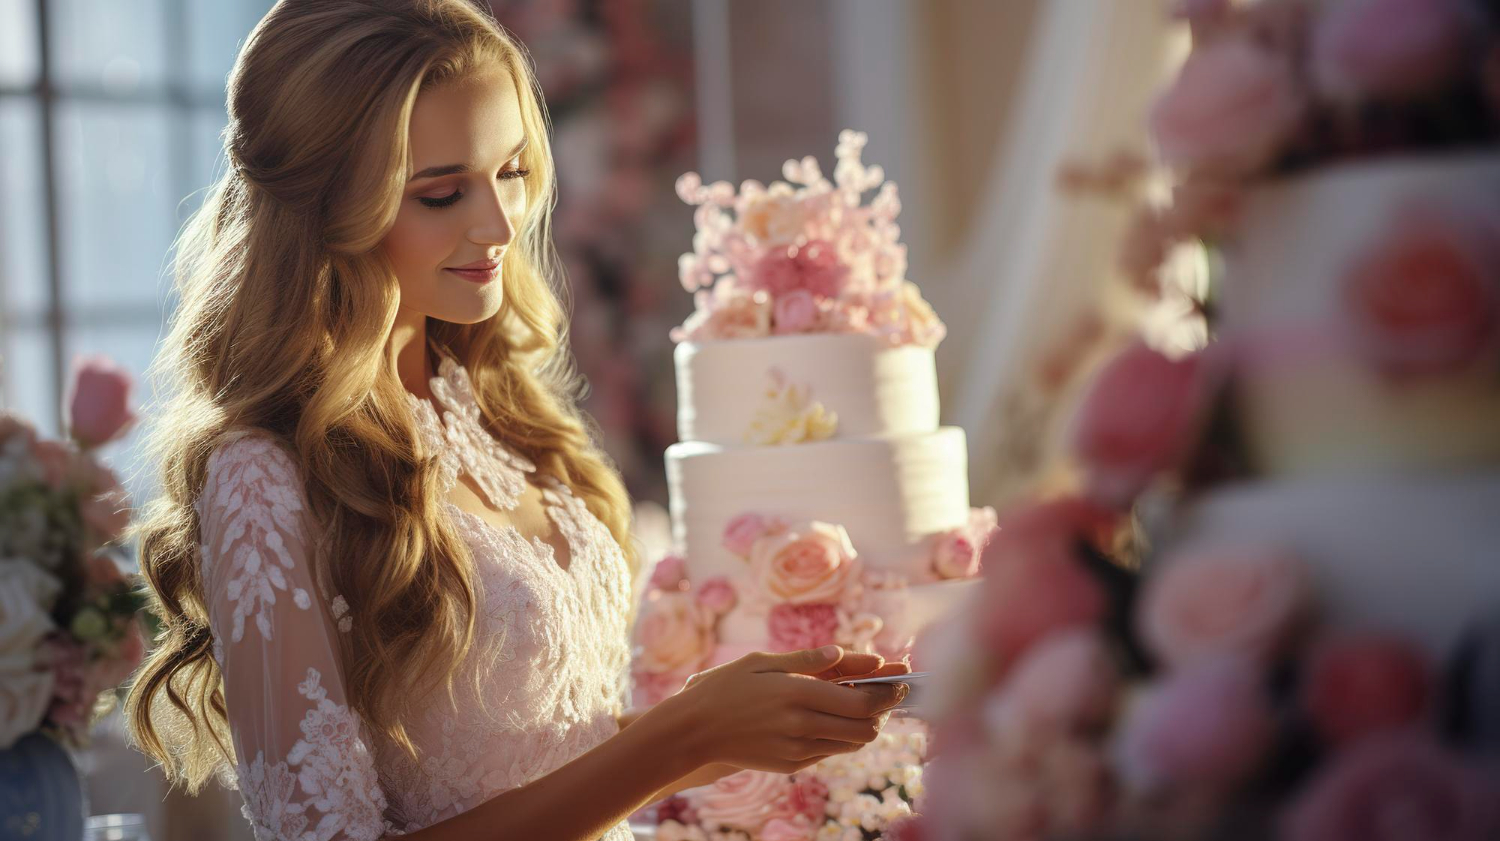 showcasing a beautiful girl affectionately looking at the wedding cake